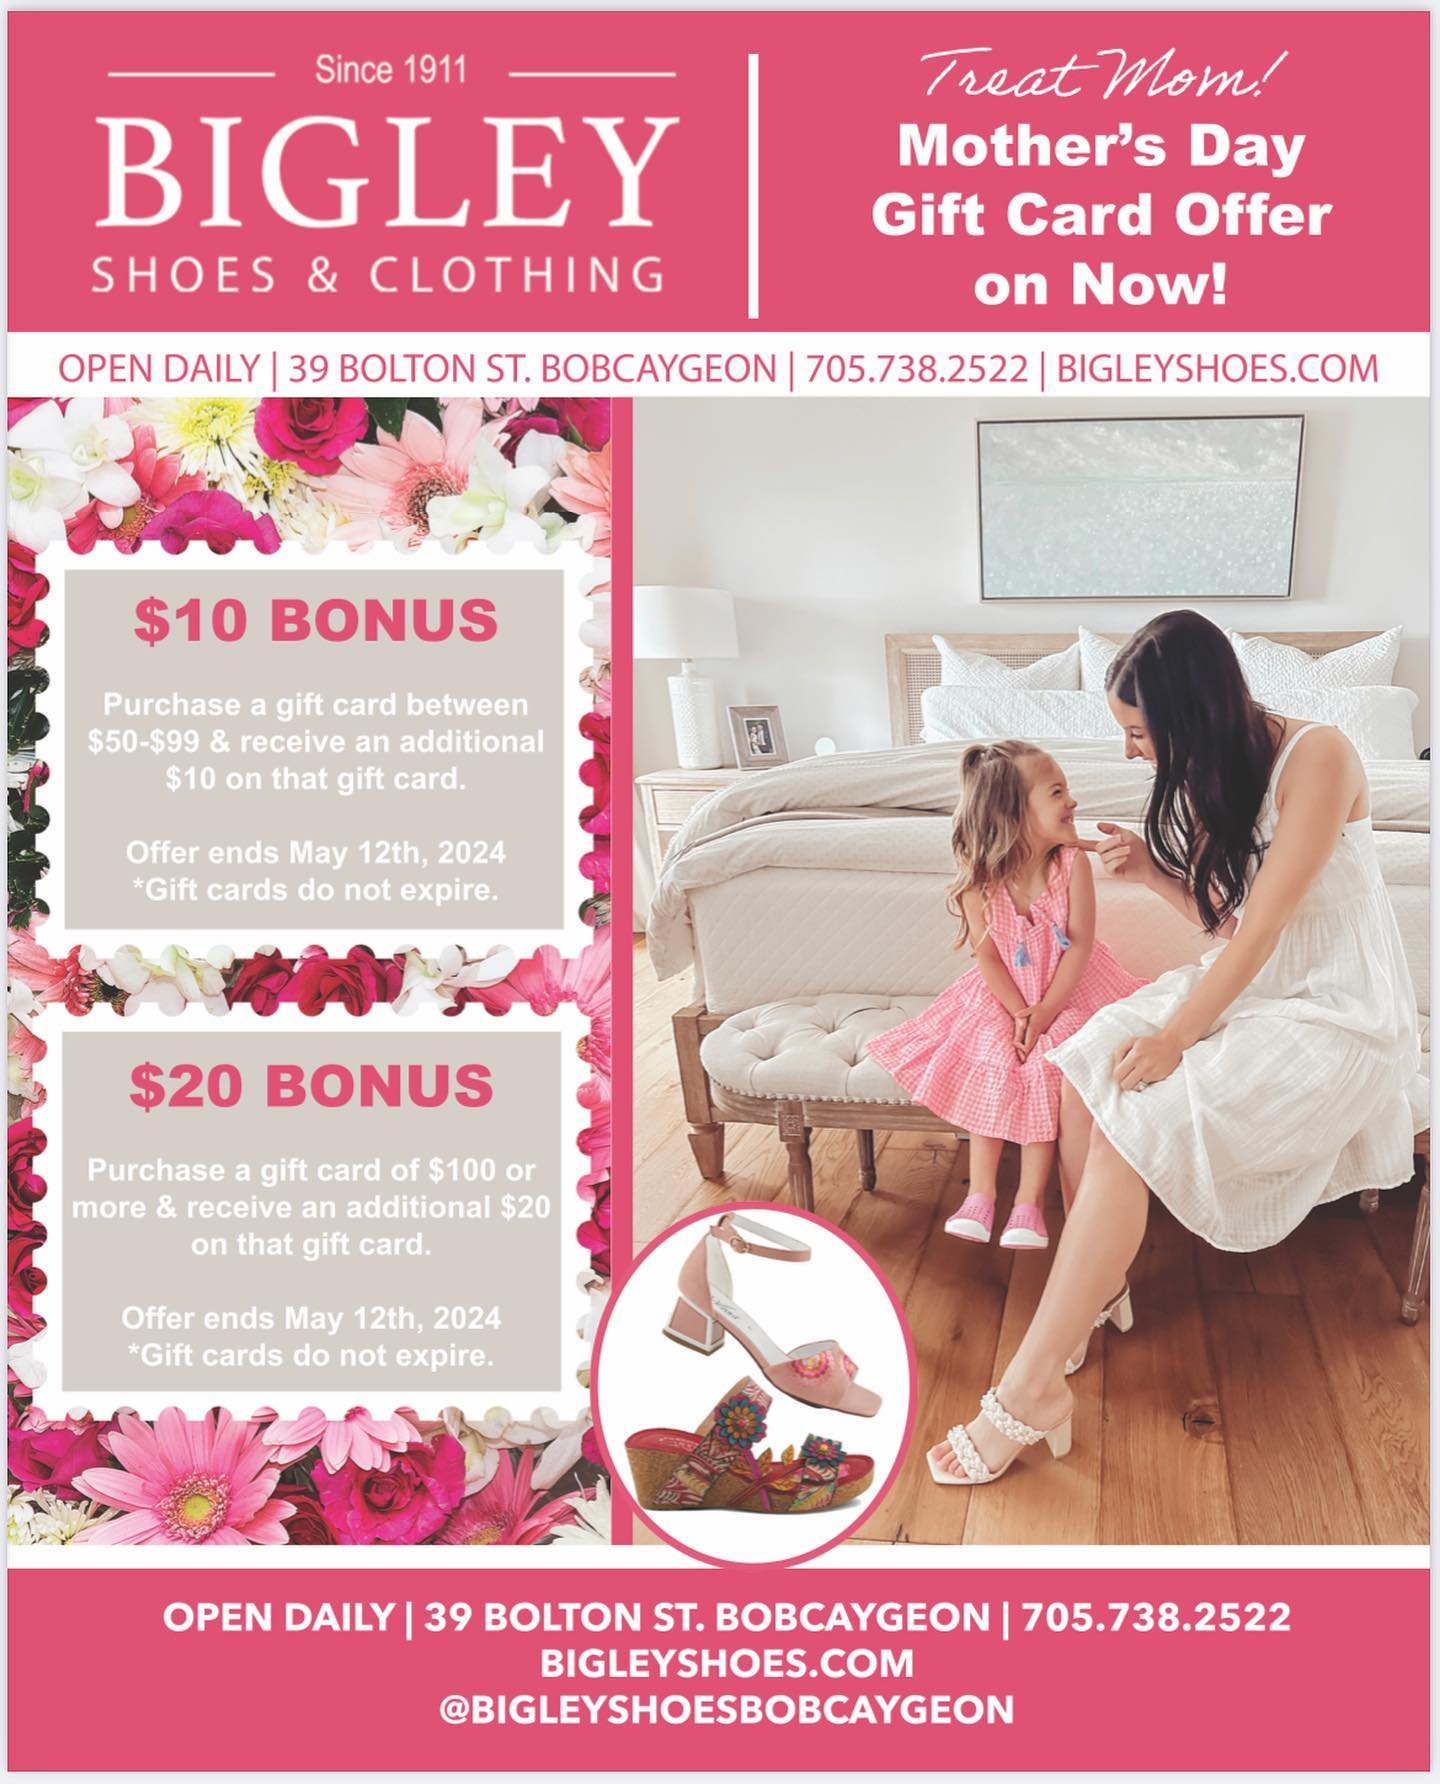 Celebrate MOM with a @bigleyshoesbobcaygeon Gift Card🛍️💕only available until May 12th!